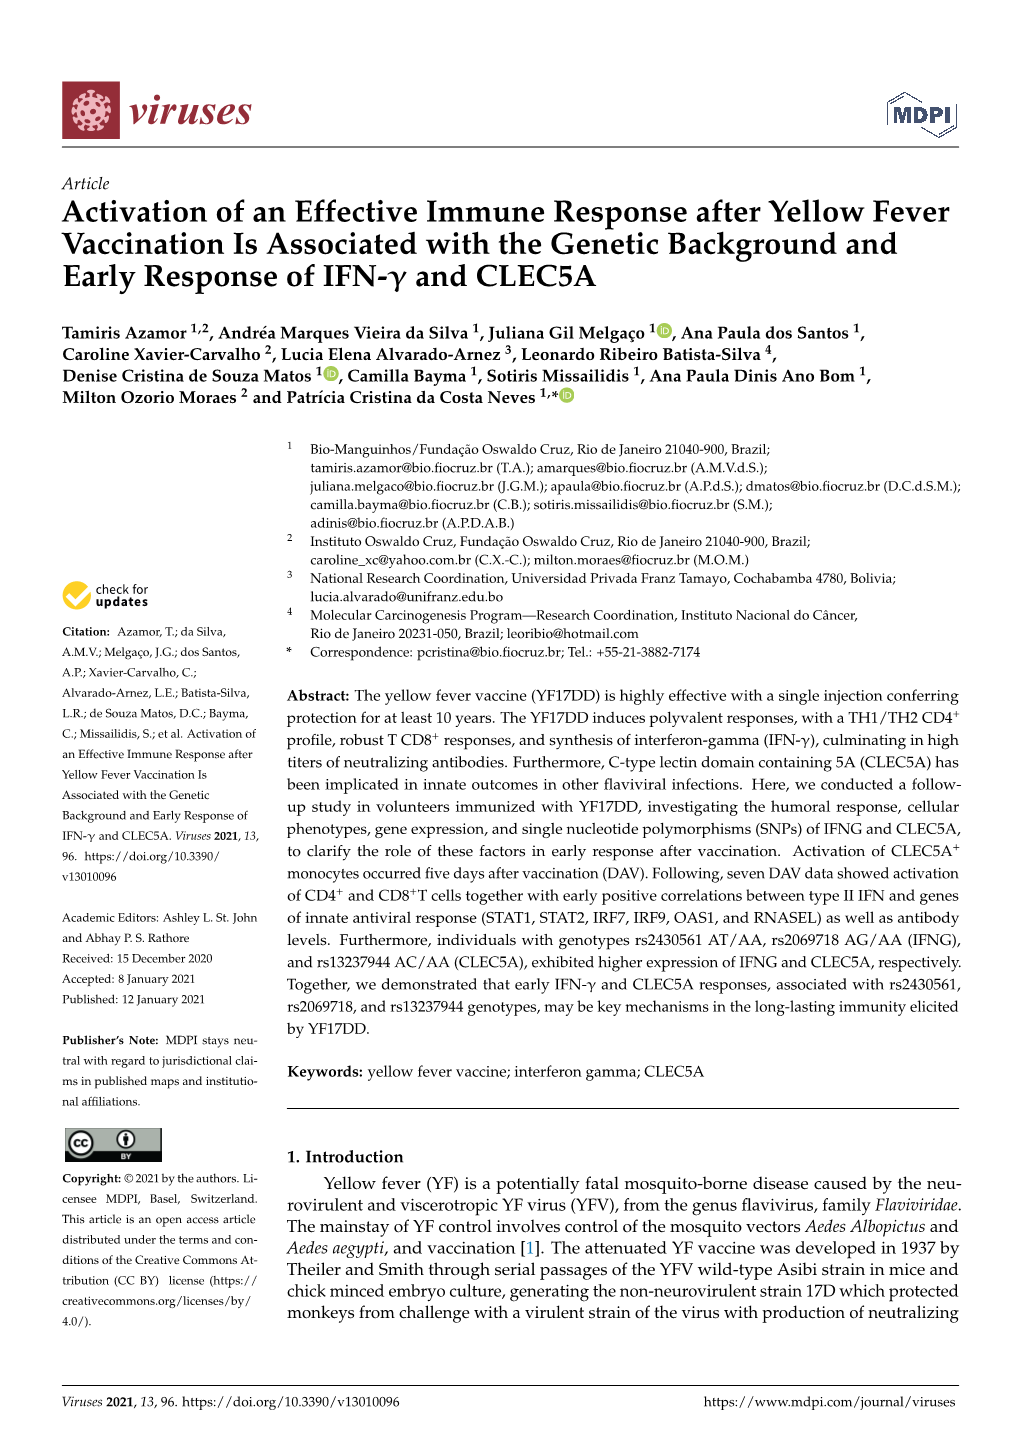 Activation of an Effective Immune Response After Yellow Fever Vaccination Is Associated with the Genetic Background and Early Response of IFN-Γ and CLEC5A